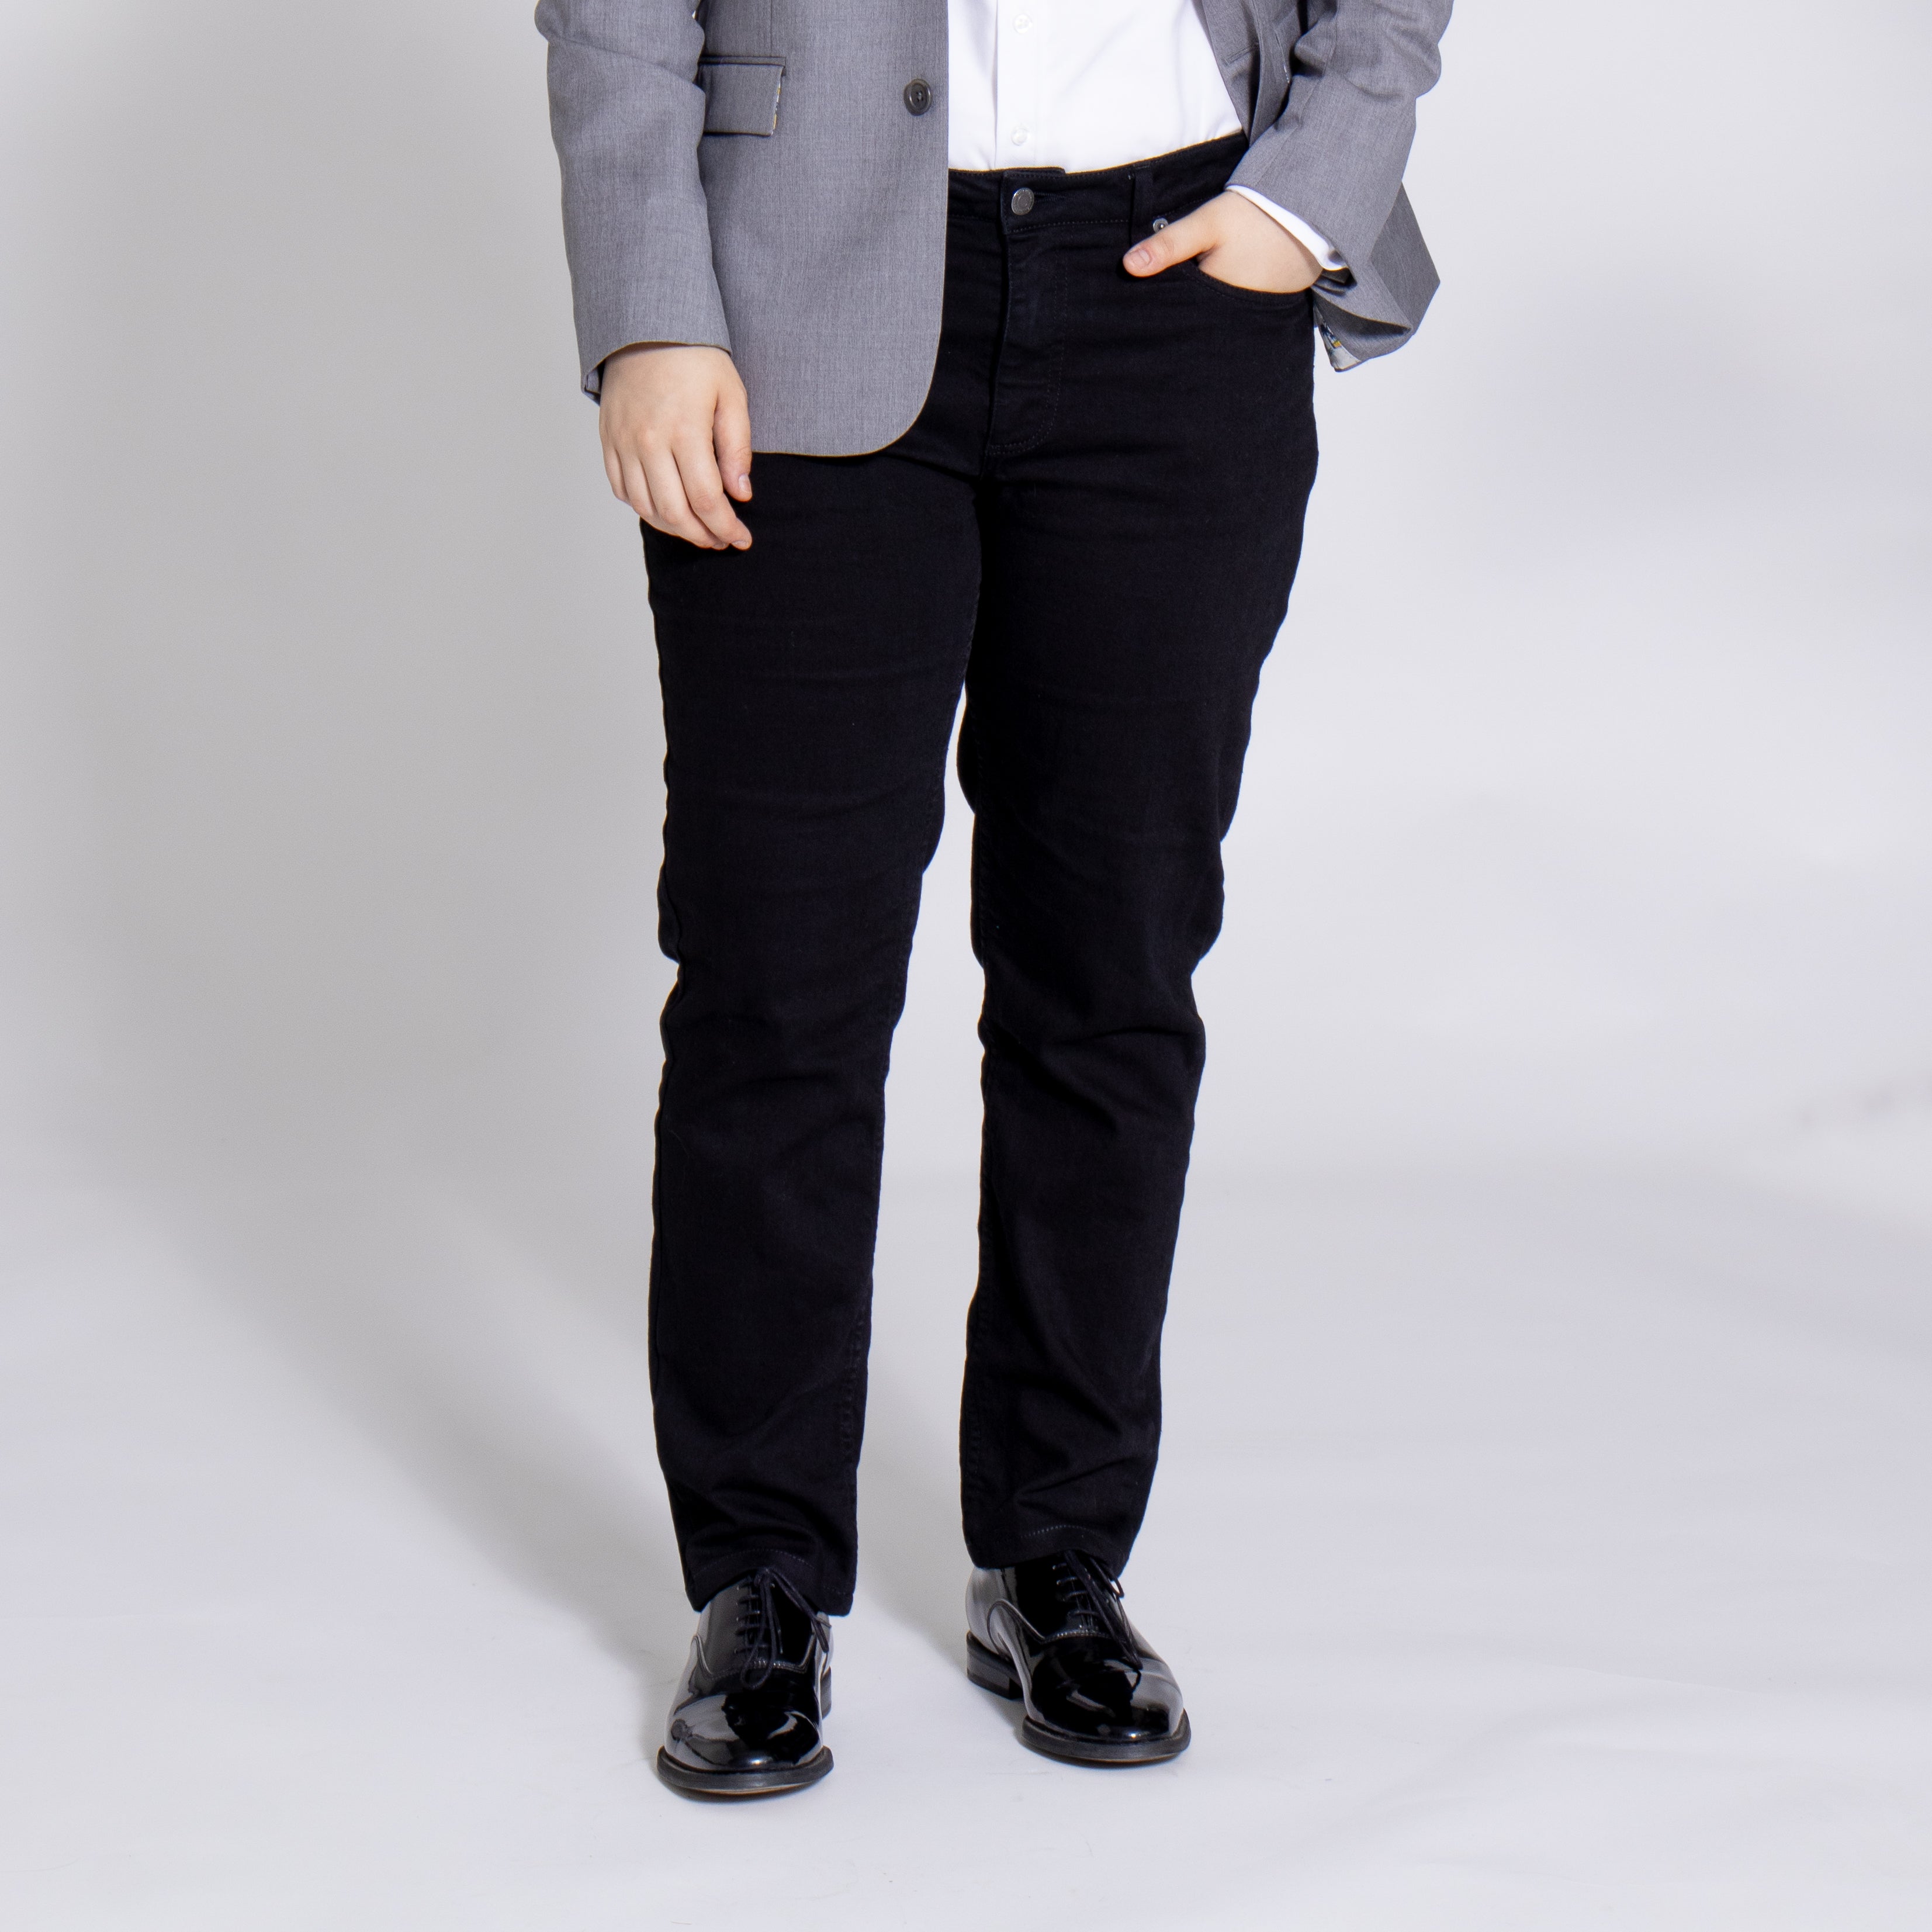 Women's tailored black jeans with gray blazer